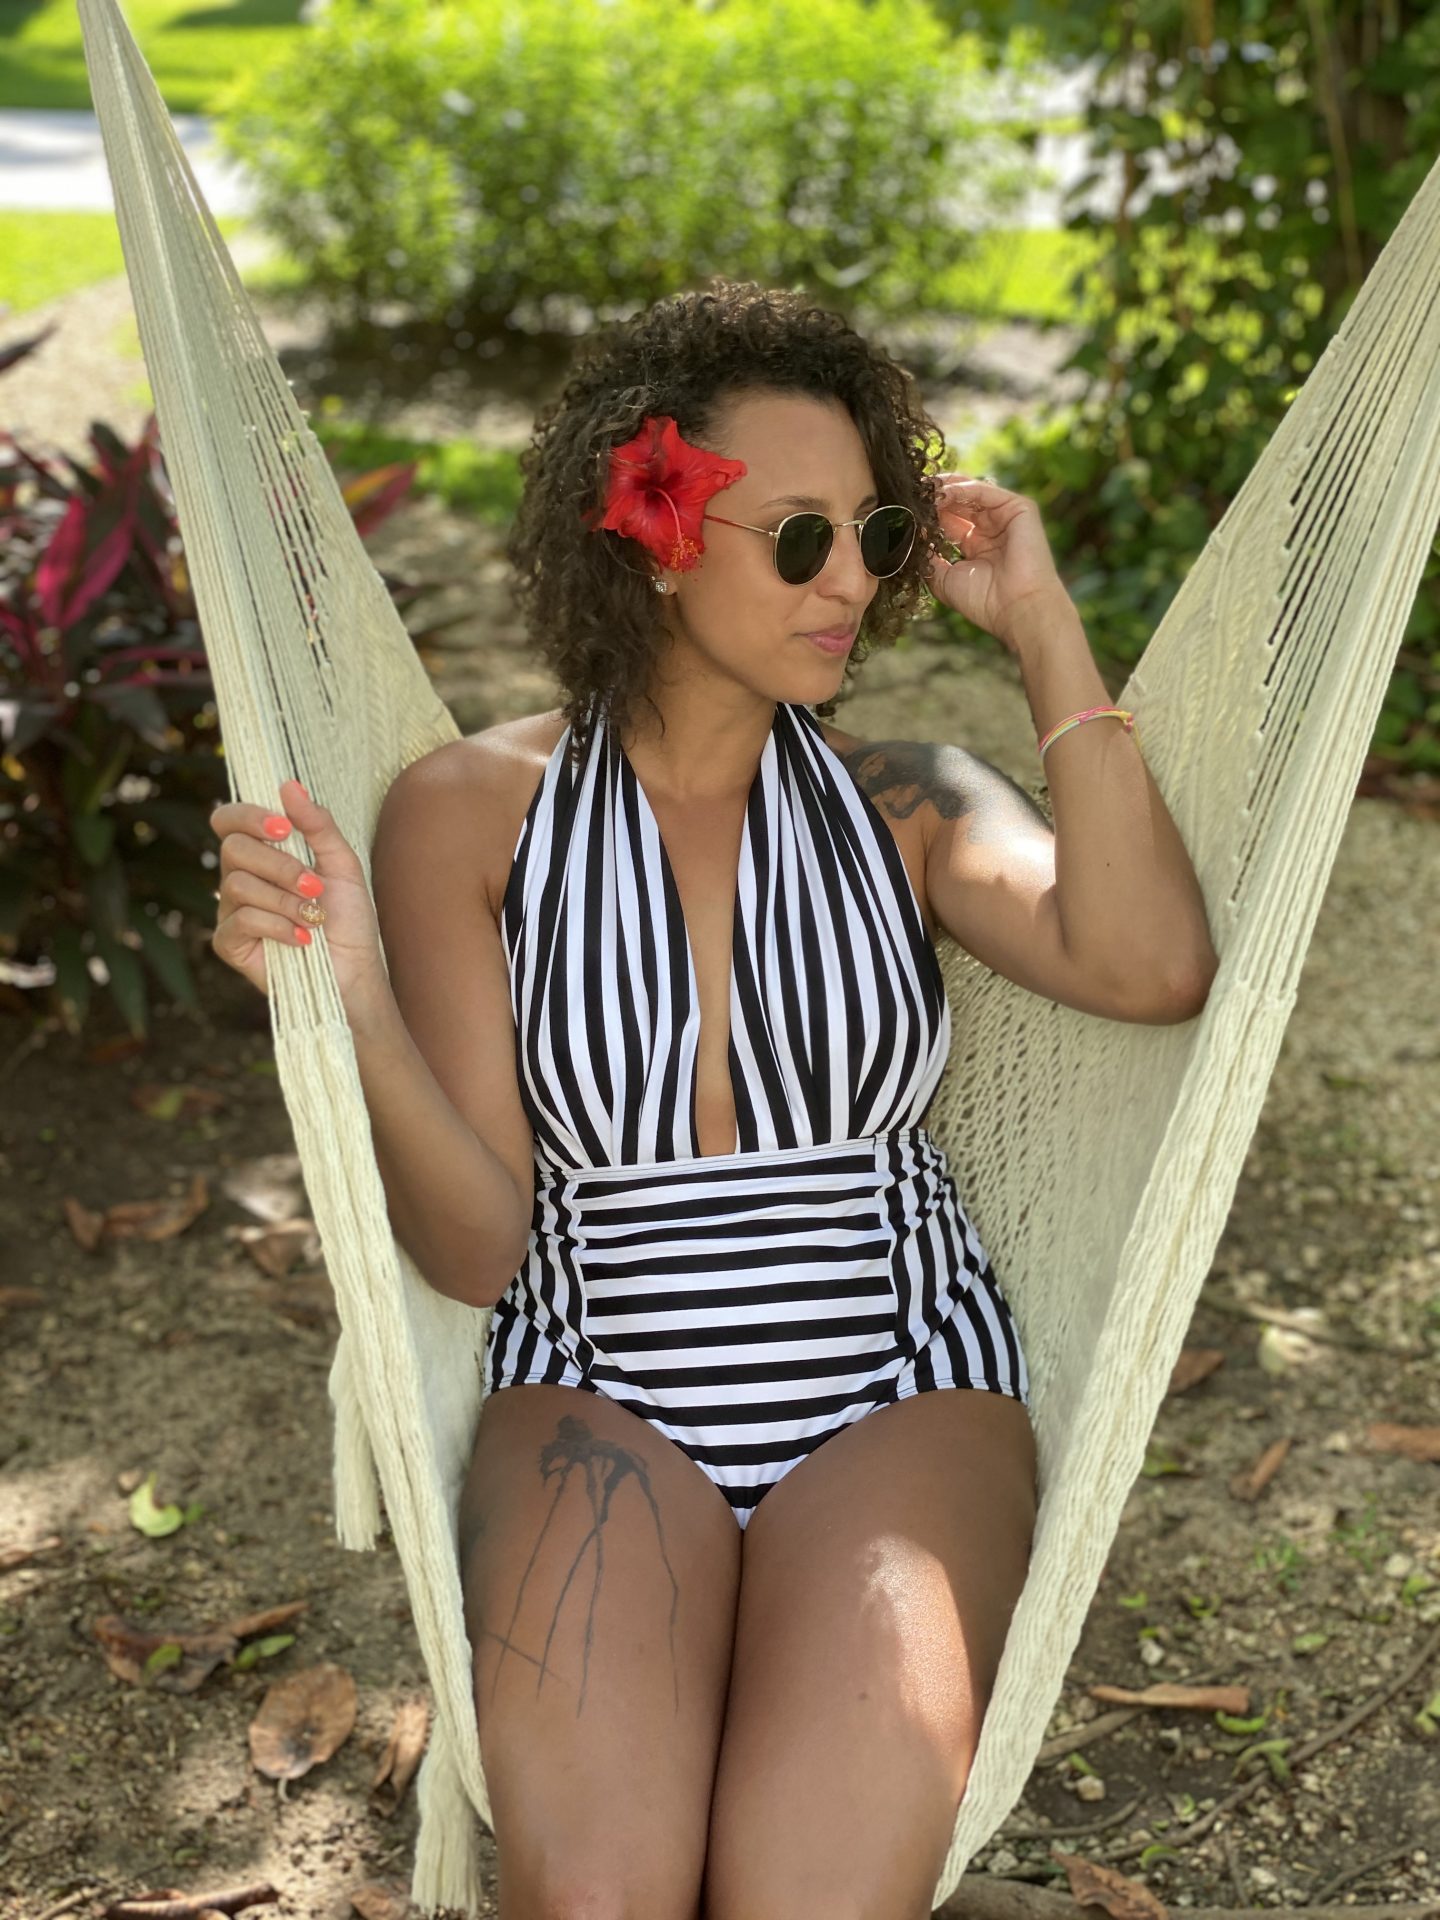 image of a mixed race woman with curly hair sitting in a hammock chair. She is wearing a black and white striped, one-piece swimsuit